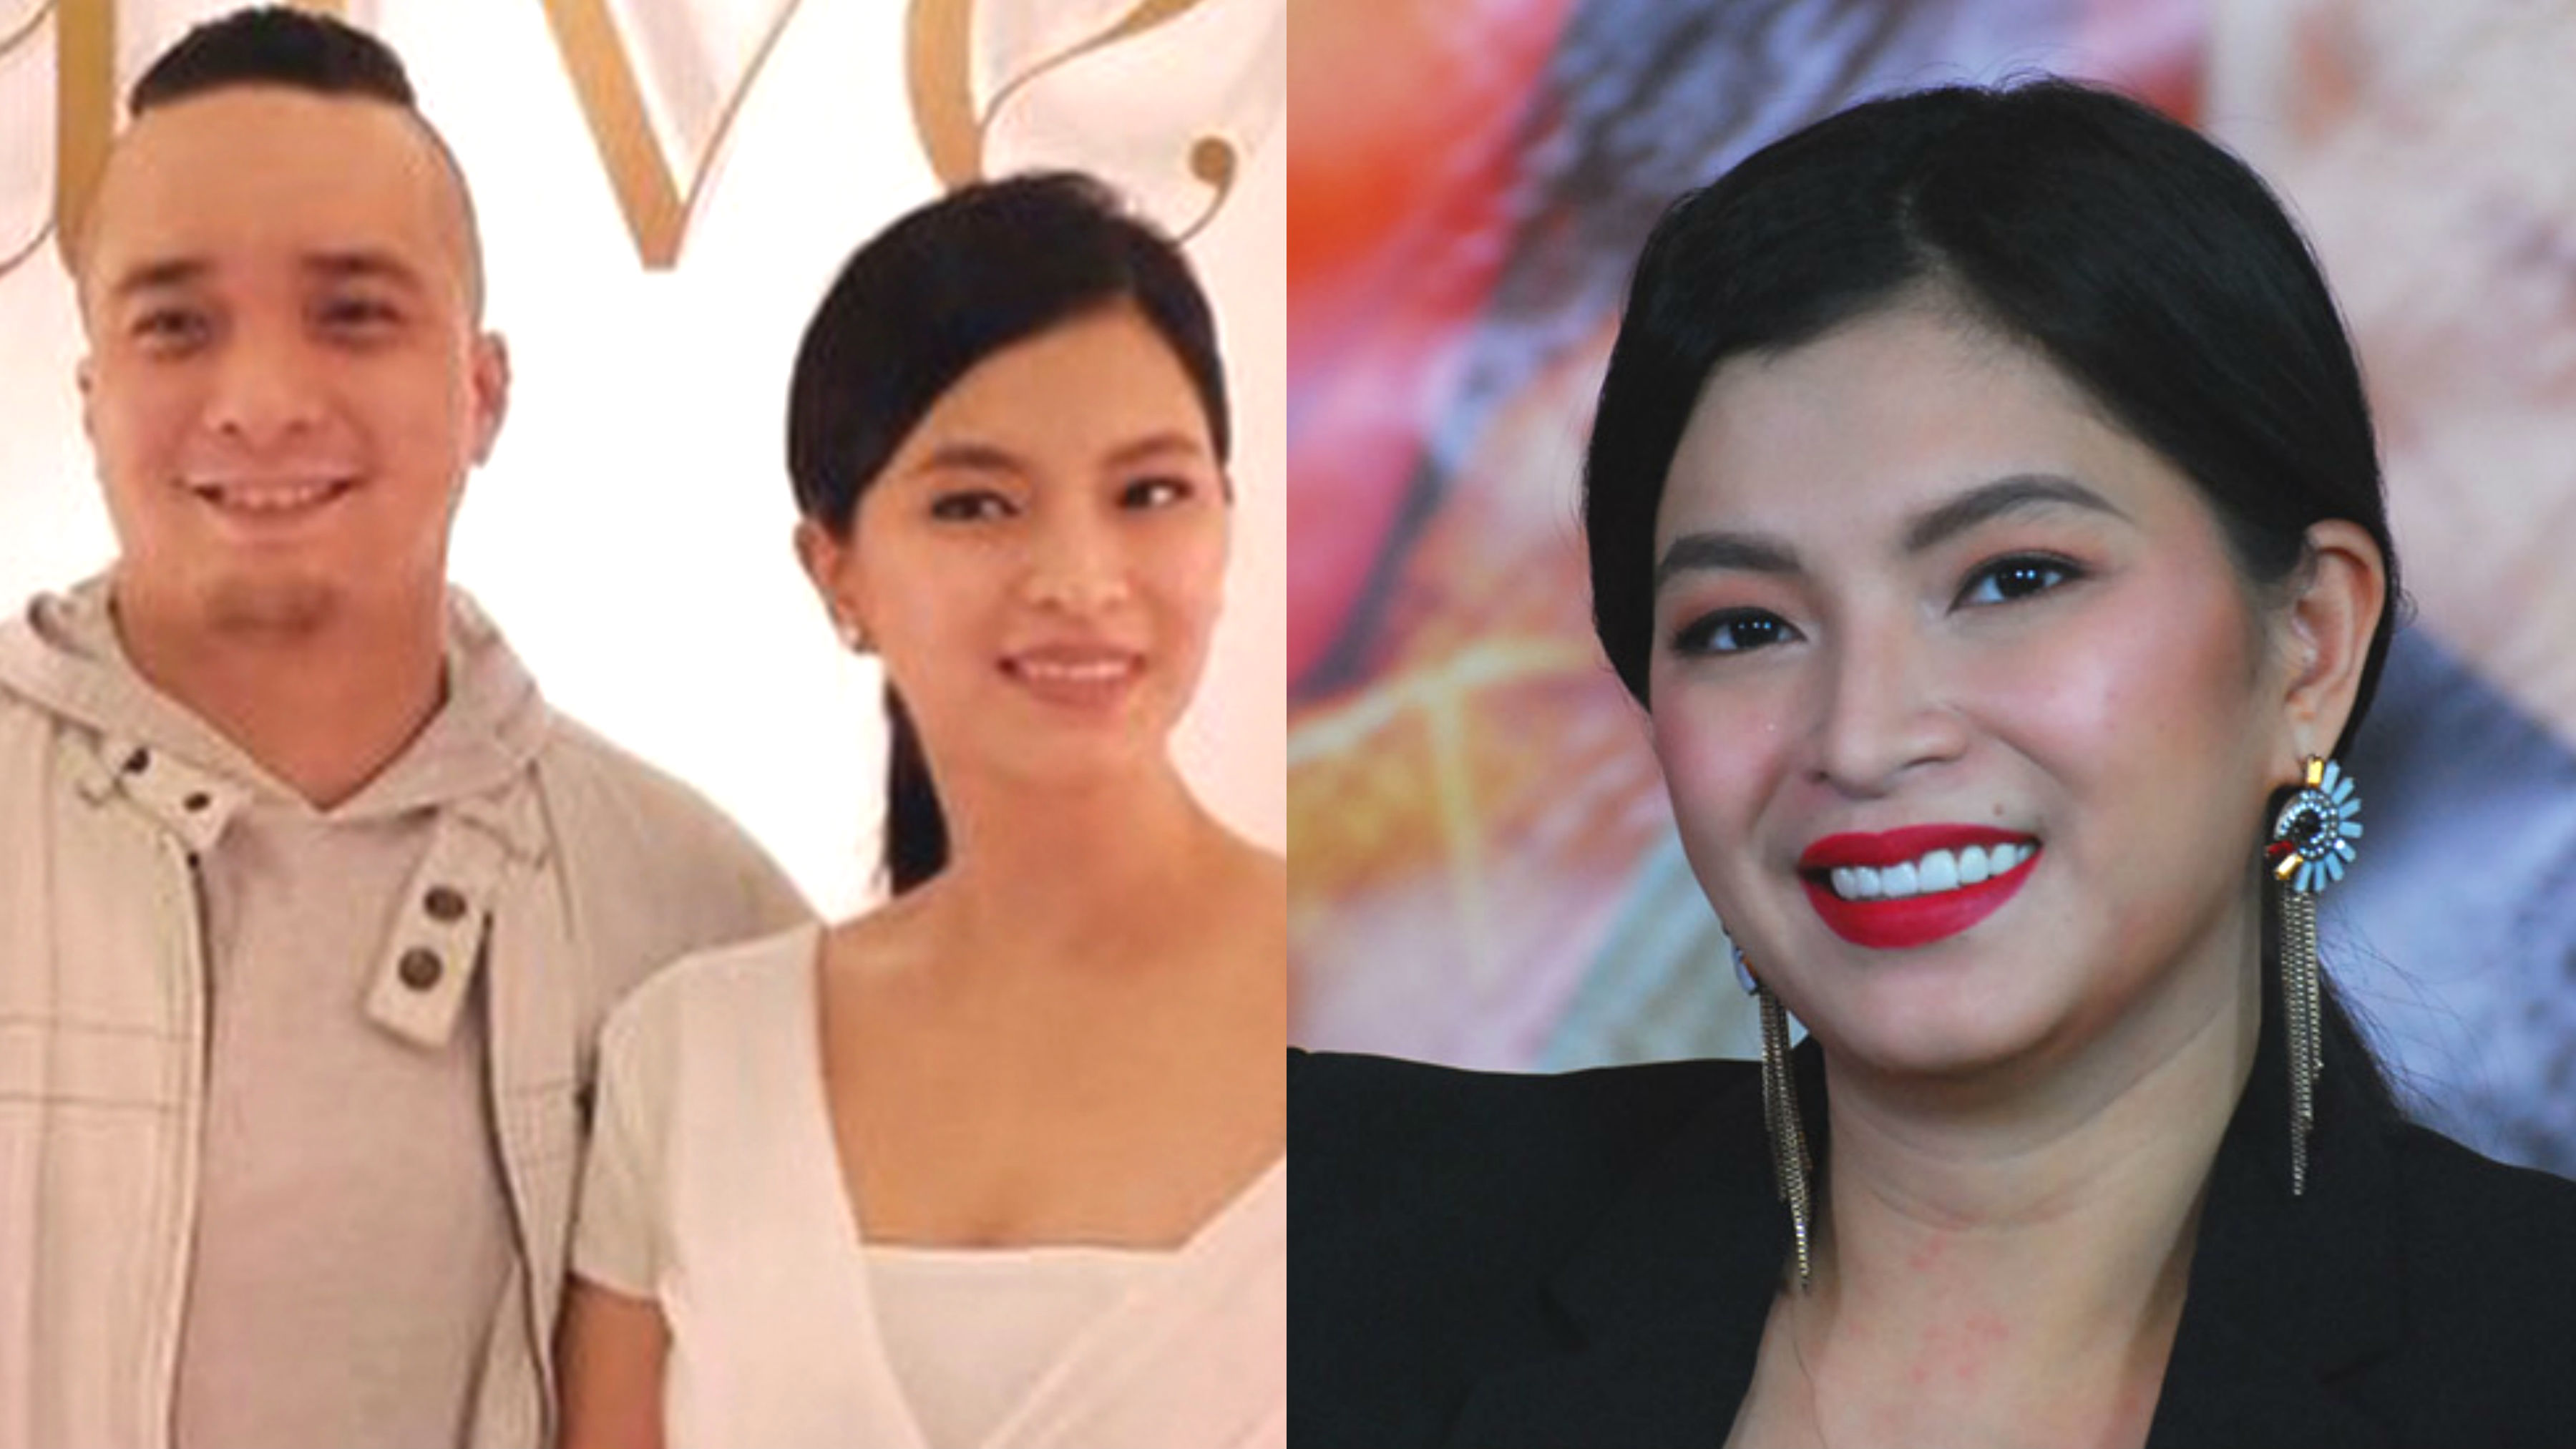 HAPPY RELATIONSHIP. Angel Locsin says she and Neil Arce are very much happy dating. She clarified that they are not yet boyfriend and girlfriend. Photos from Instagram/@therealangellocsin/ABS-CBN PR 